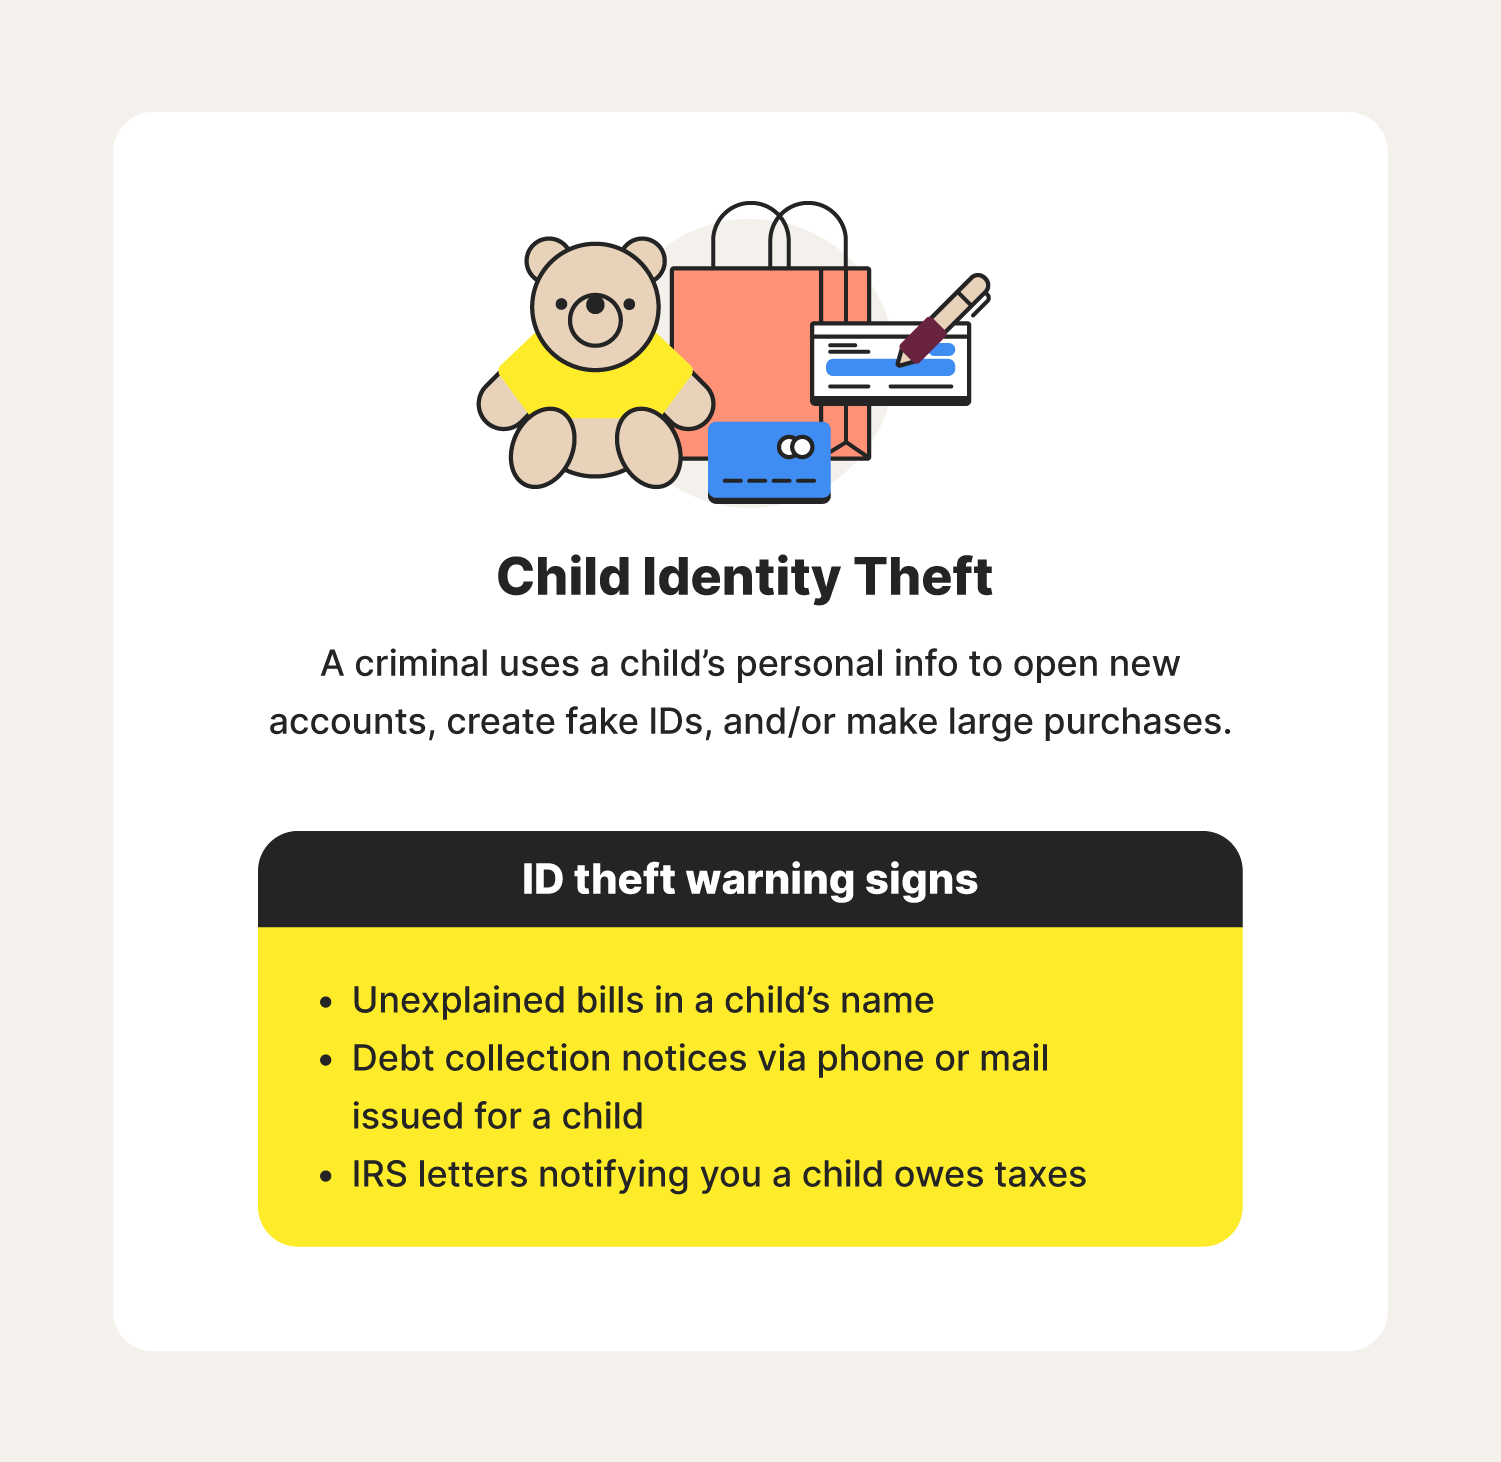 An illustration and definition of child identity theft ccompanies ID theft warning signs to help you know how to prevent identity theft. 